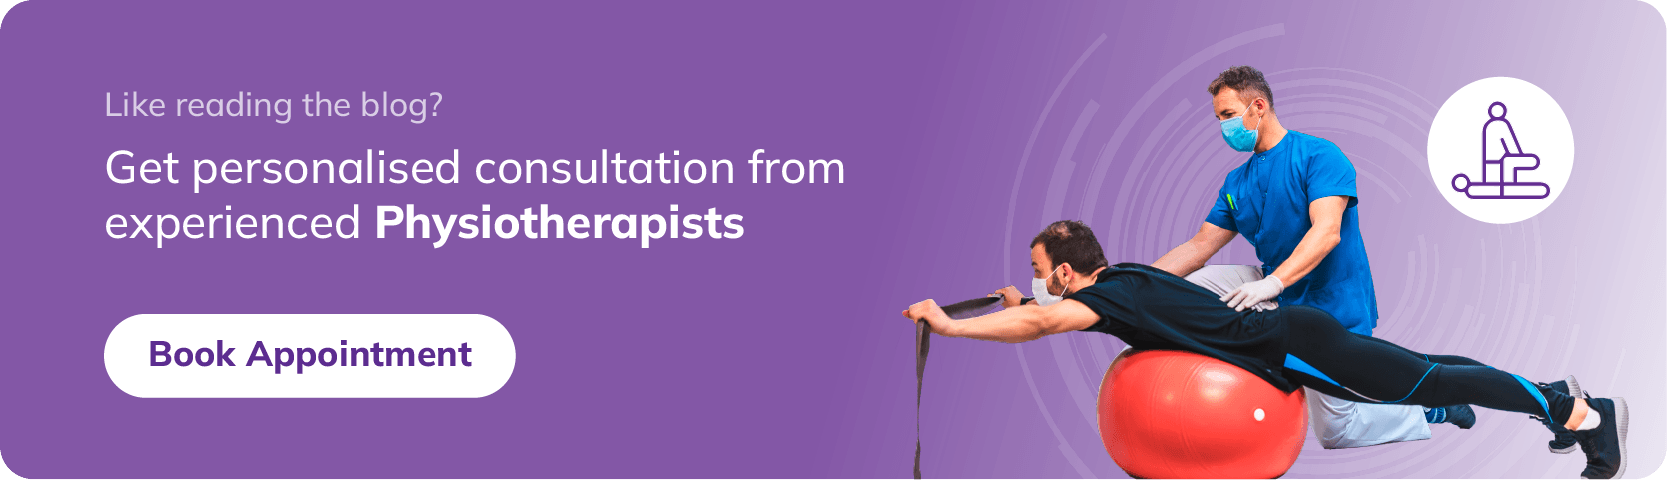 Yoga Asanas For Constipation: Top 5 Asanas For Quick Relief banner